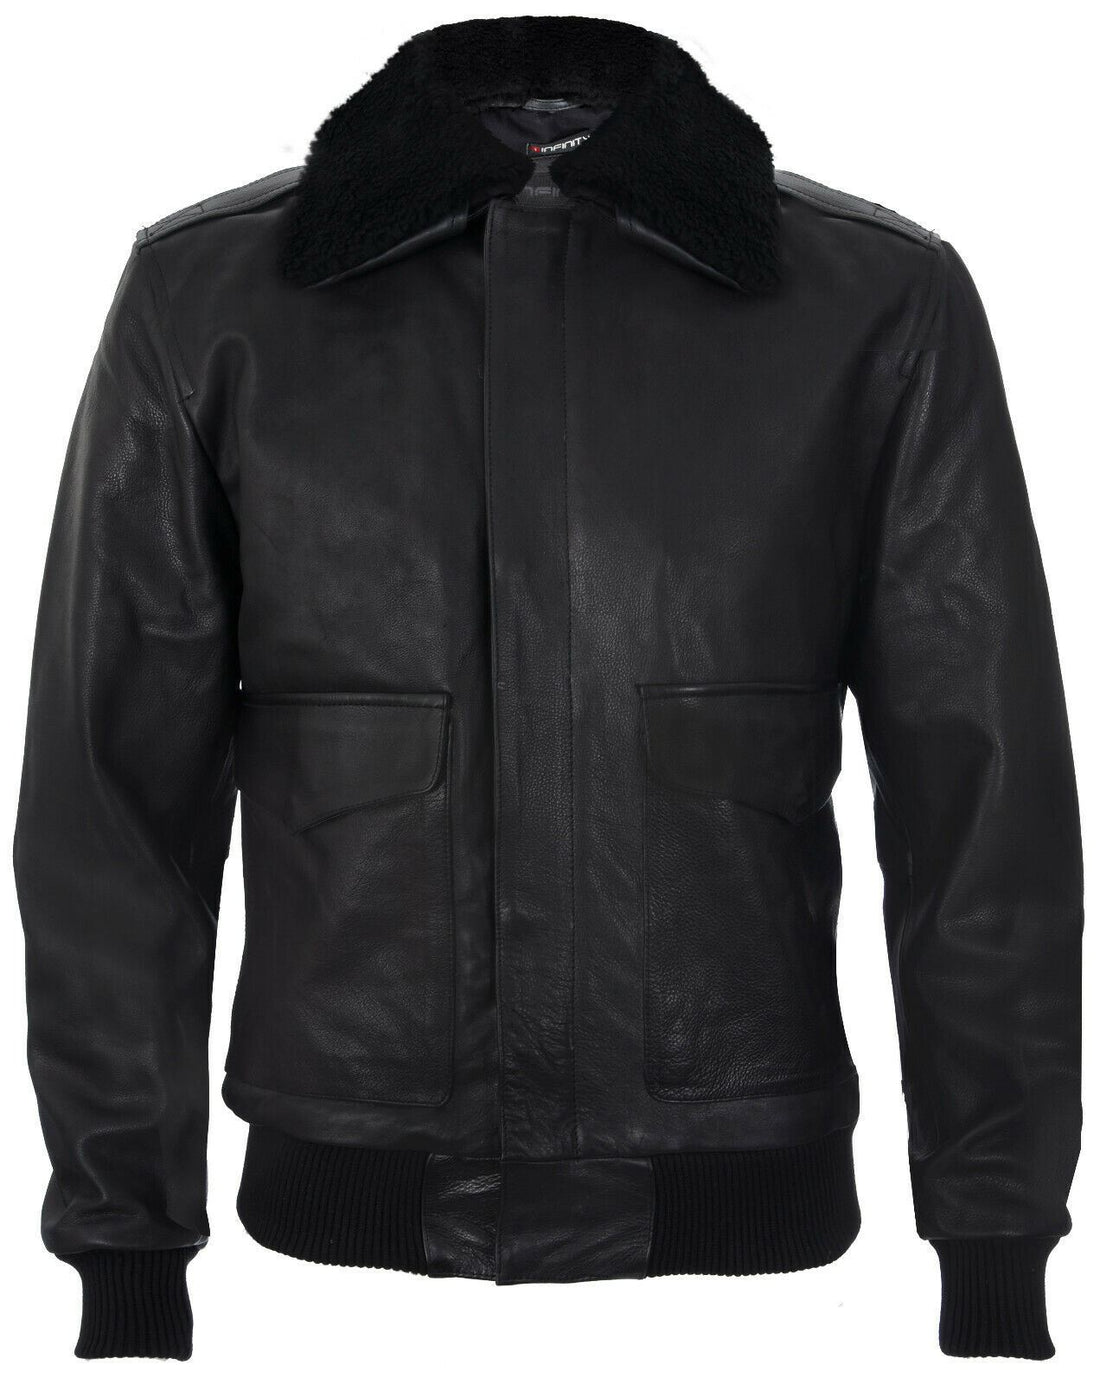 Mens A2 Cowhide Bomber Jacket-Caistor - Upperclass Fashions 